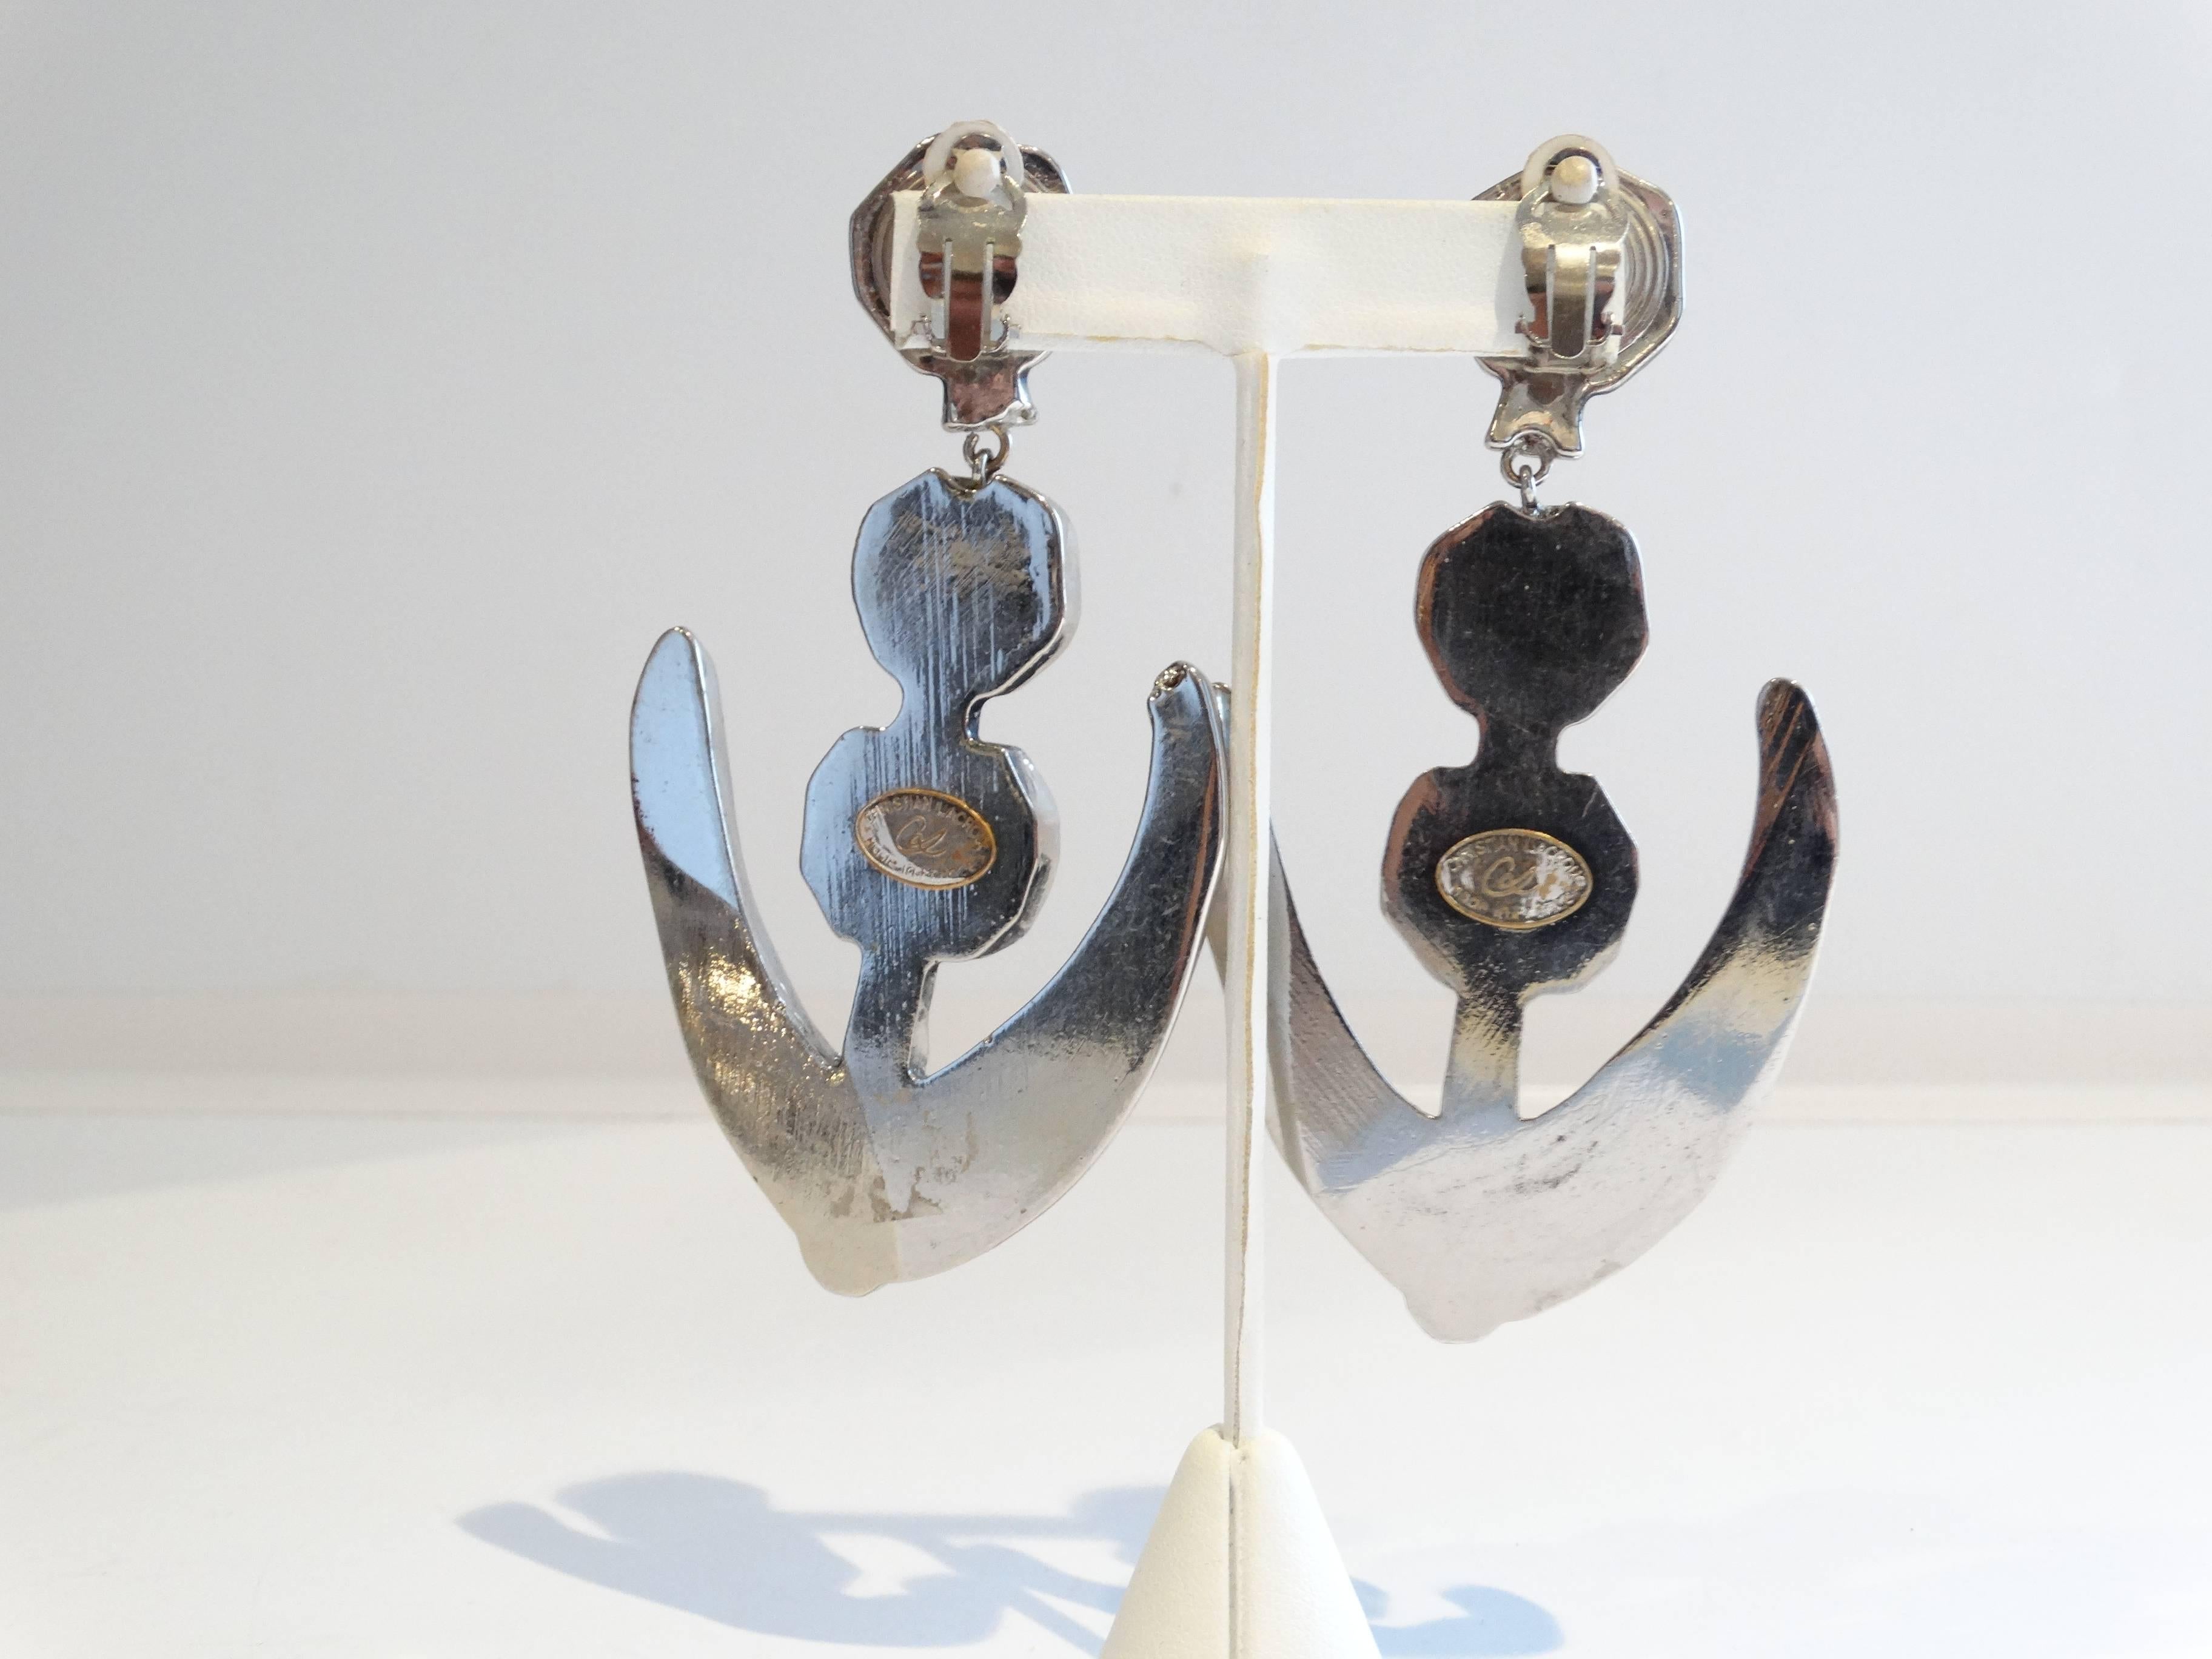 Runway 1980s Christian Lacroix Futuristic Drop Earrings  In Excellent Condition For Sale In Scottsdale, AZ